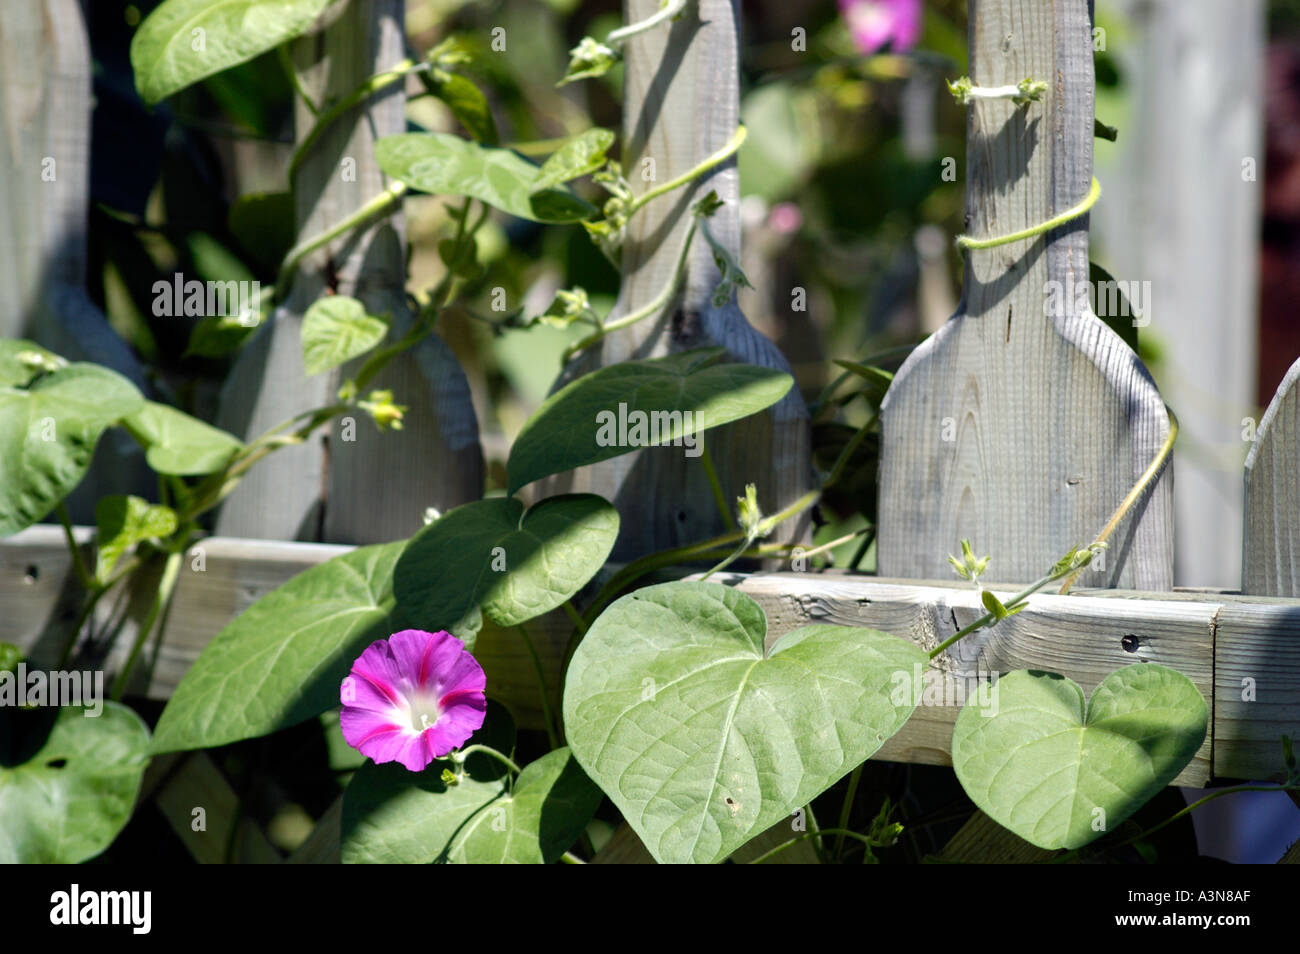 Morning Glory flower with vine climbing wooden fence Stock Photo